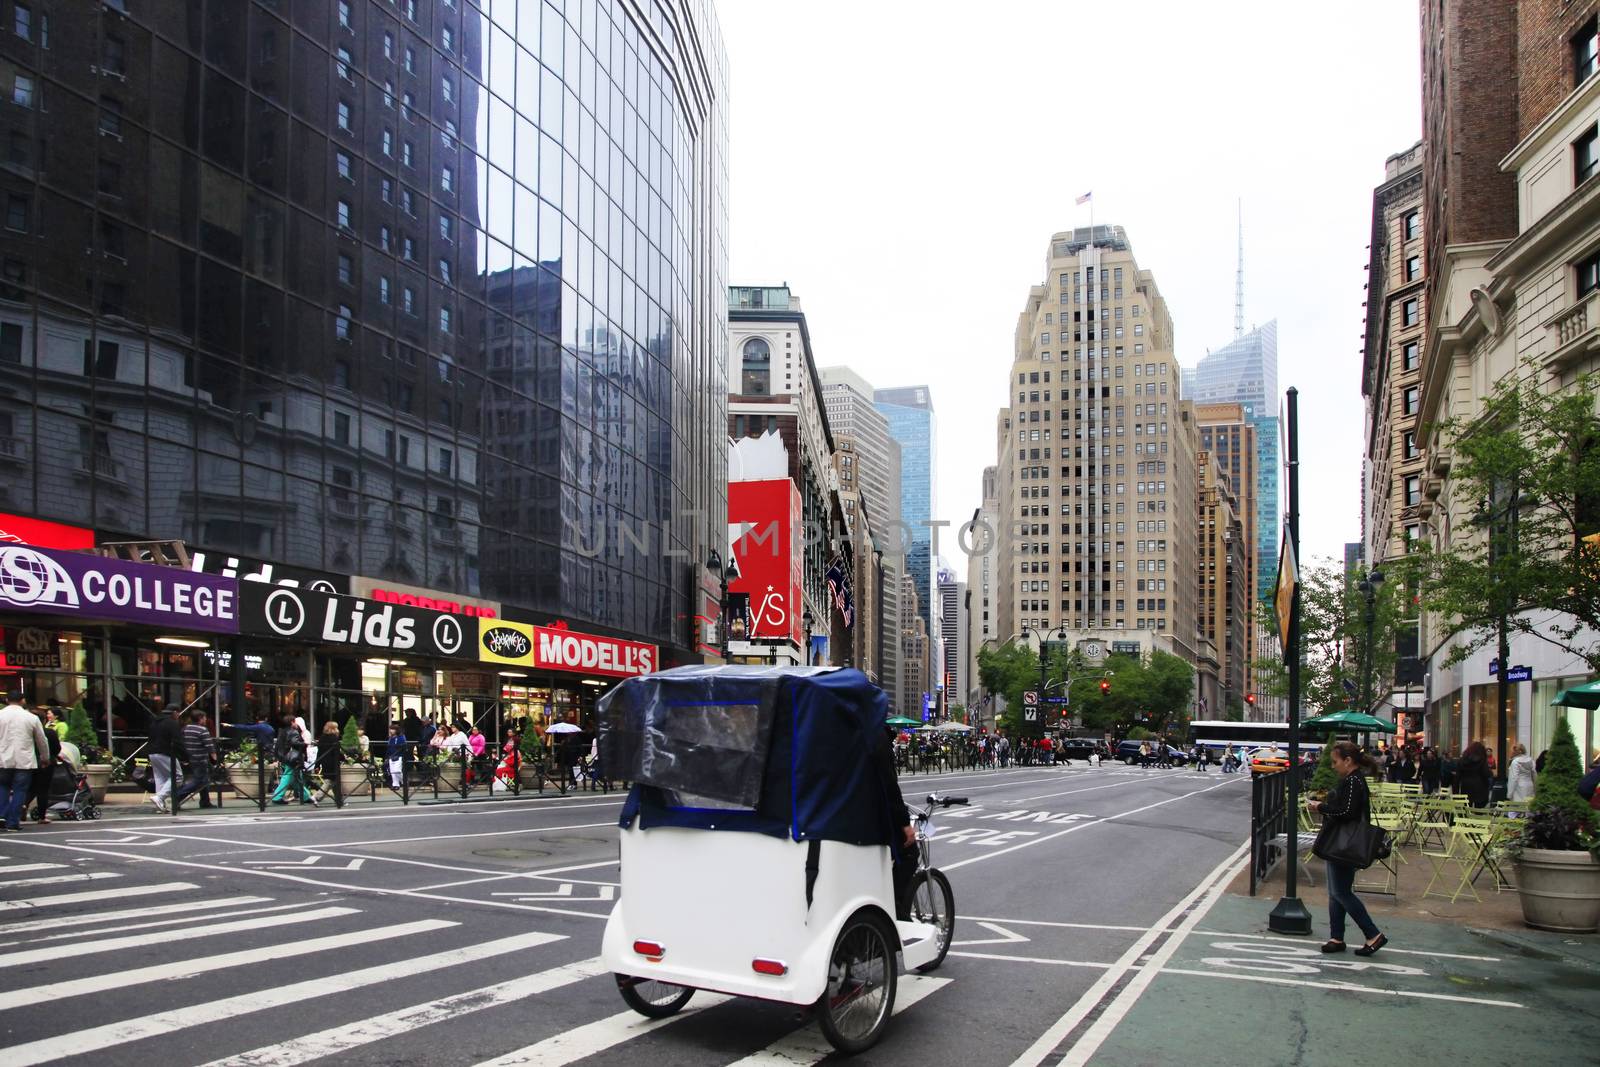 New York City, USA - May 19, 2013: rickshaw on street in Manhattan, NY. Manhattan is the most densely populated borough of New York City.